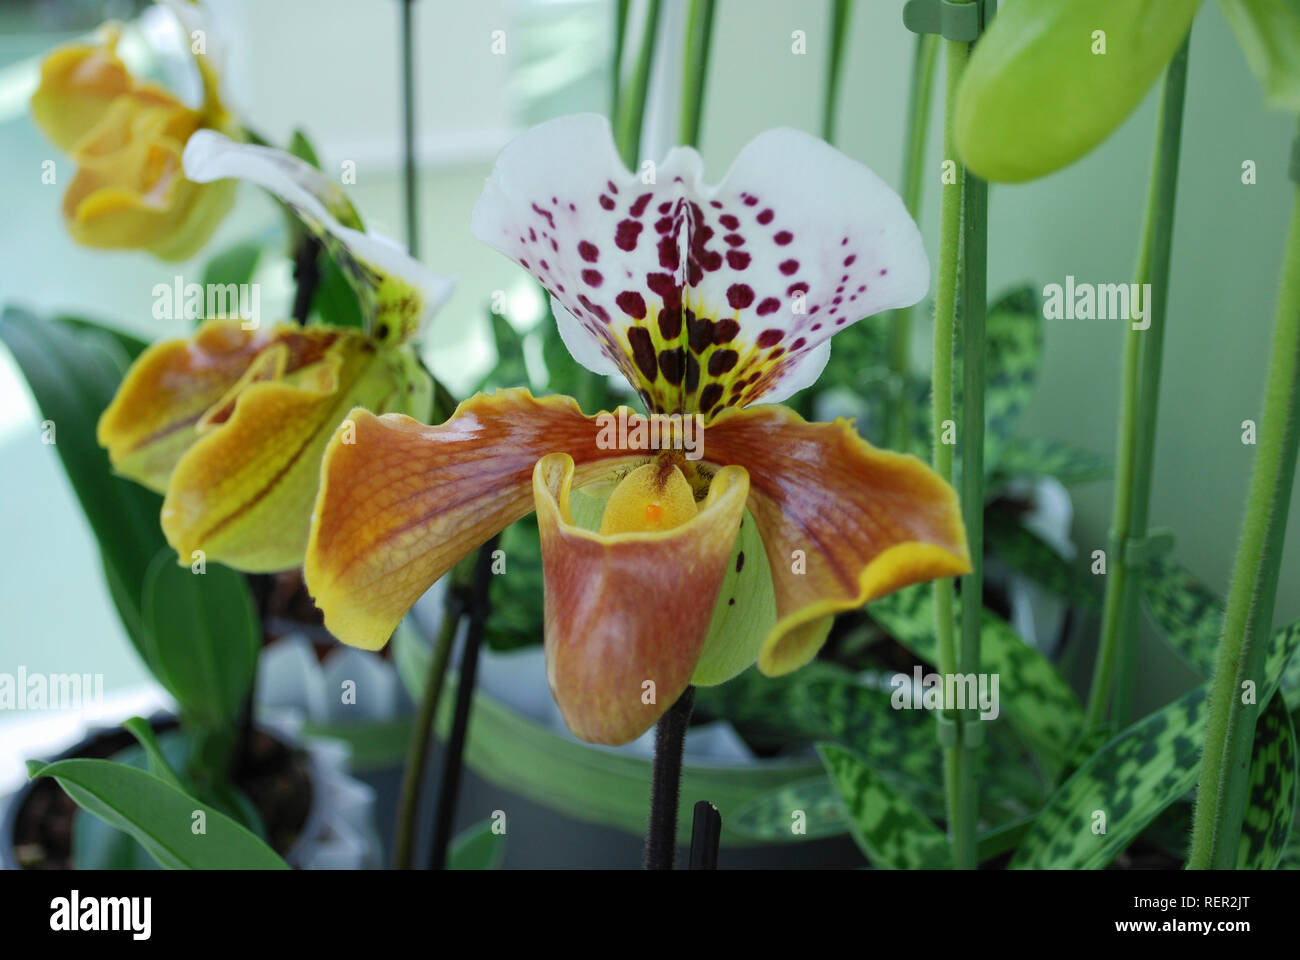 Orchid Paphiopedilum flower. Decorative plants for gardening and greenhouse. Stock Photo